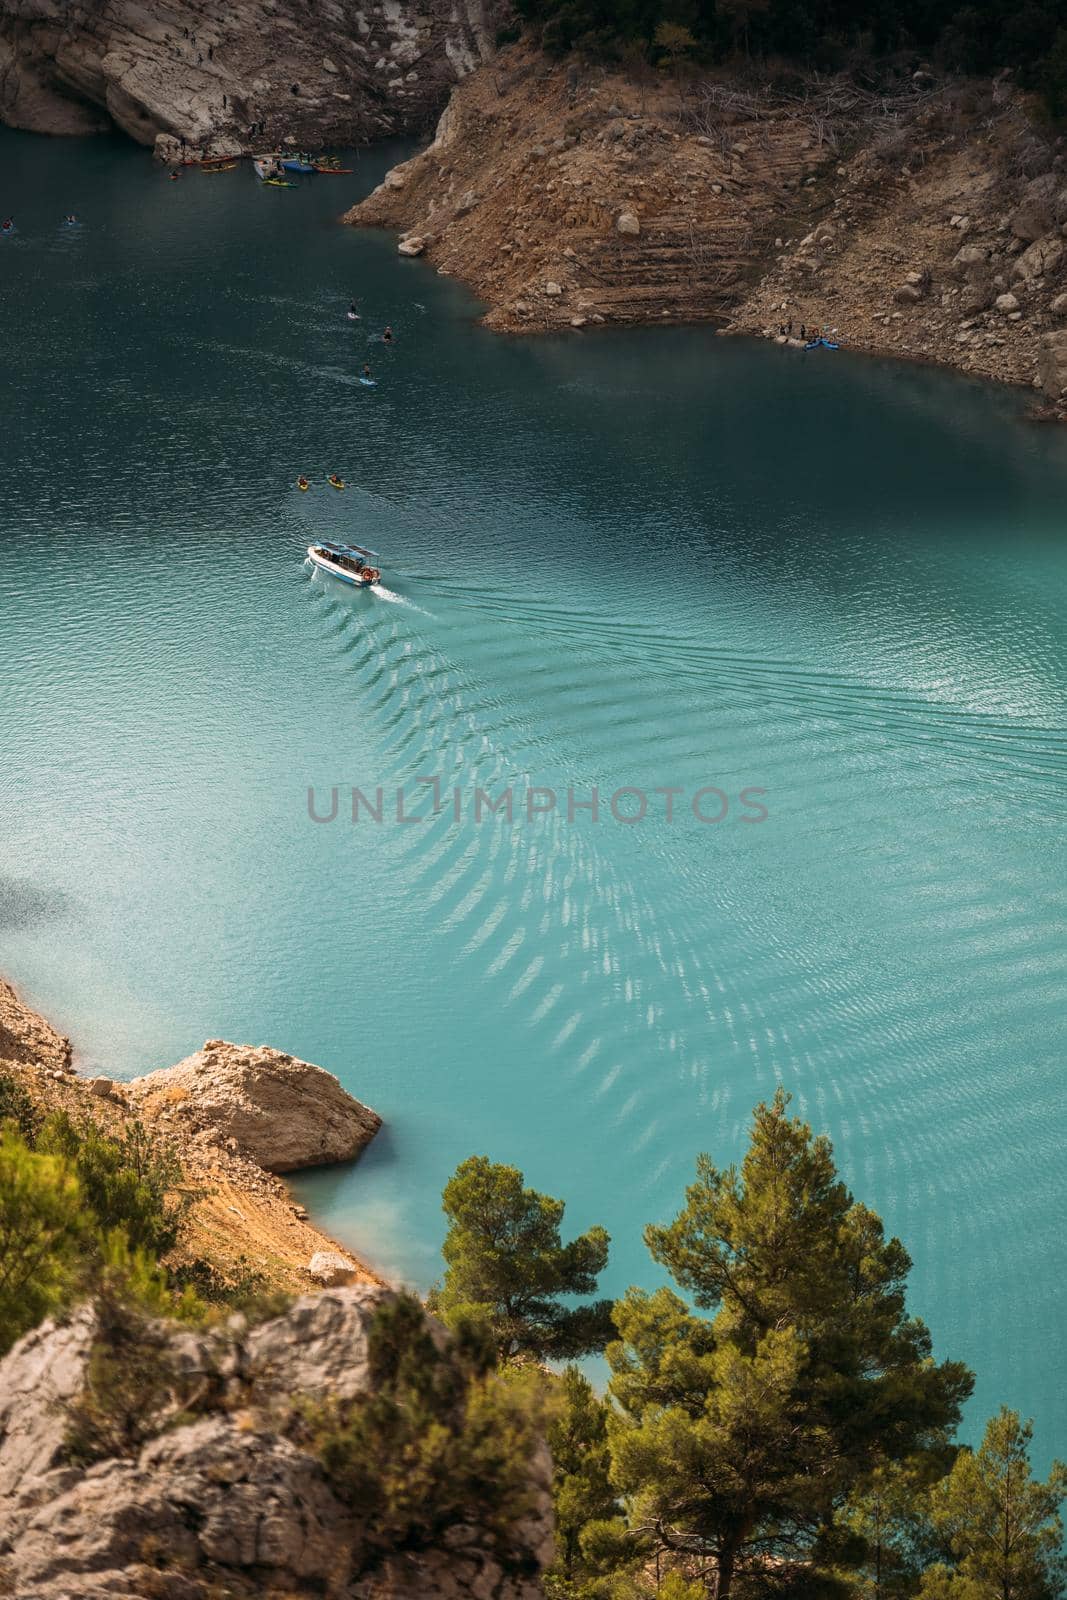 Boat floating and leaving a trail on the turquoise water surface. Summer vacation holidays. Congost de Mont Rebei, Catalonia, Spain.